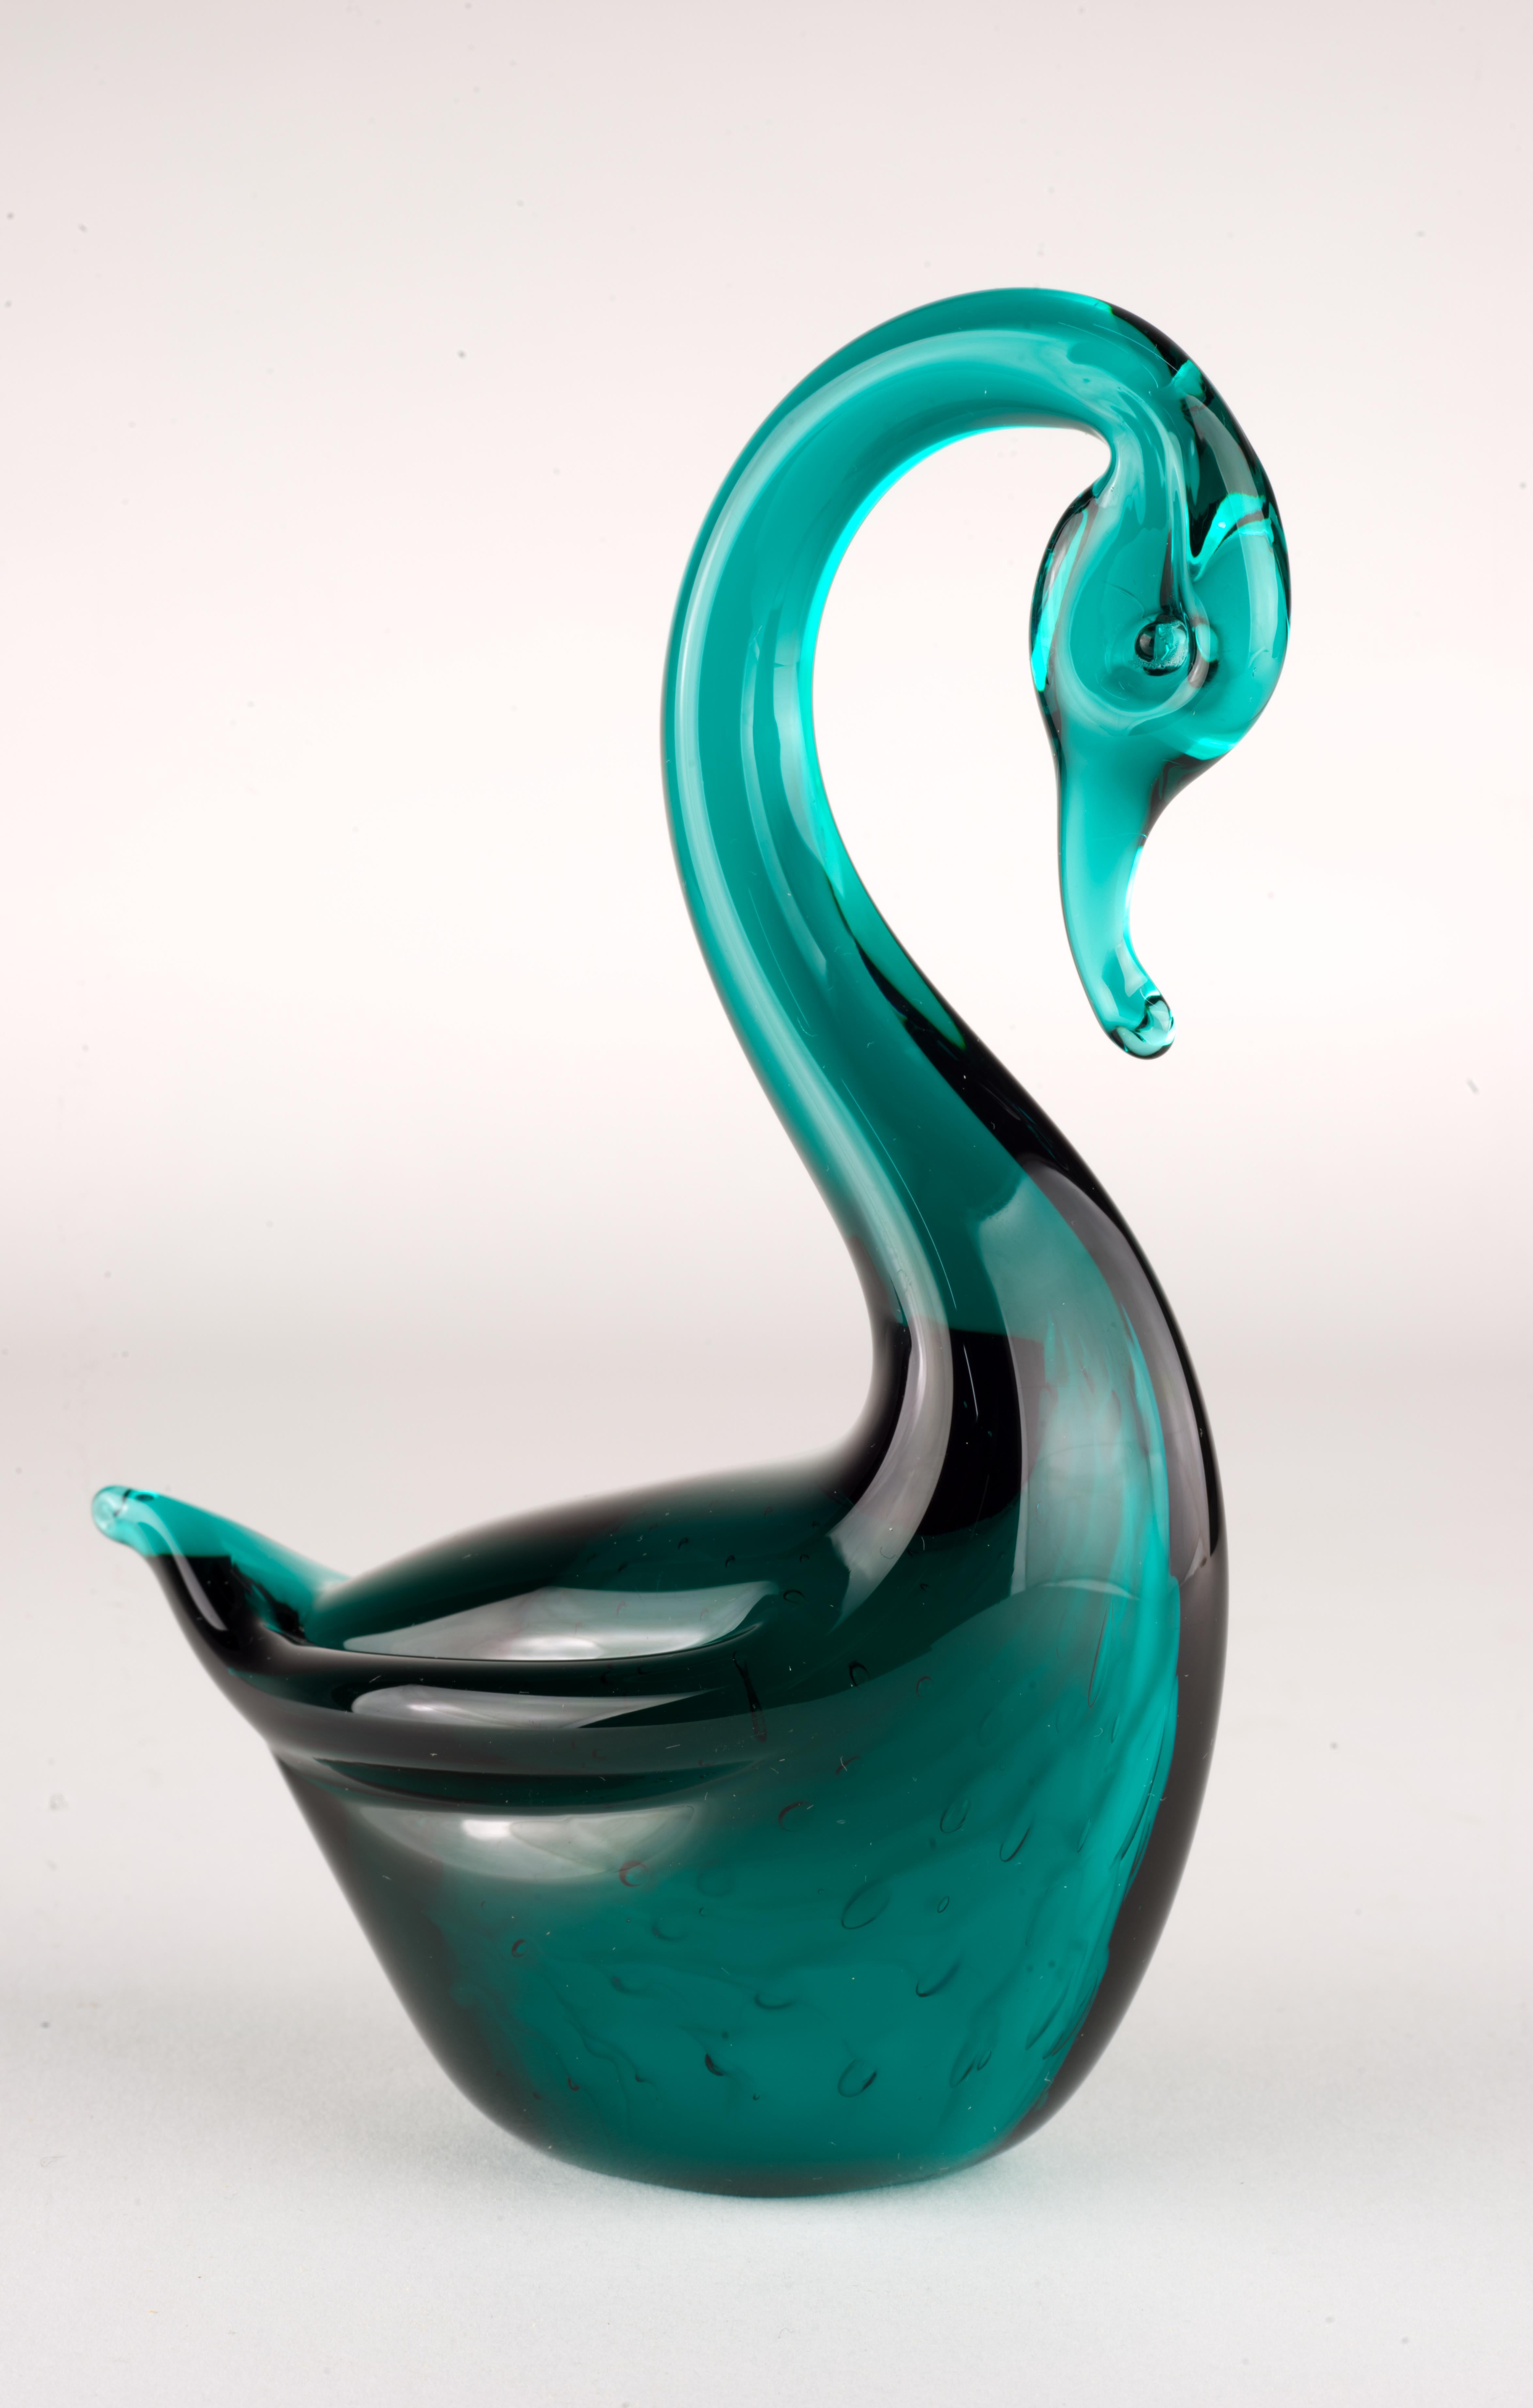 Murano glass swan figurine or paperweight is made of white glass encased inside dark green glass in sommerso technique; controlled bubbles are used throughout the body of the swan.